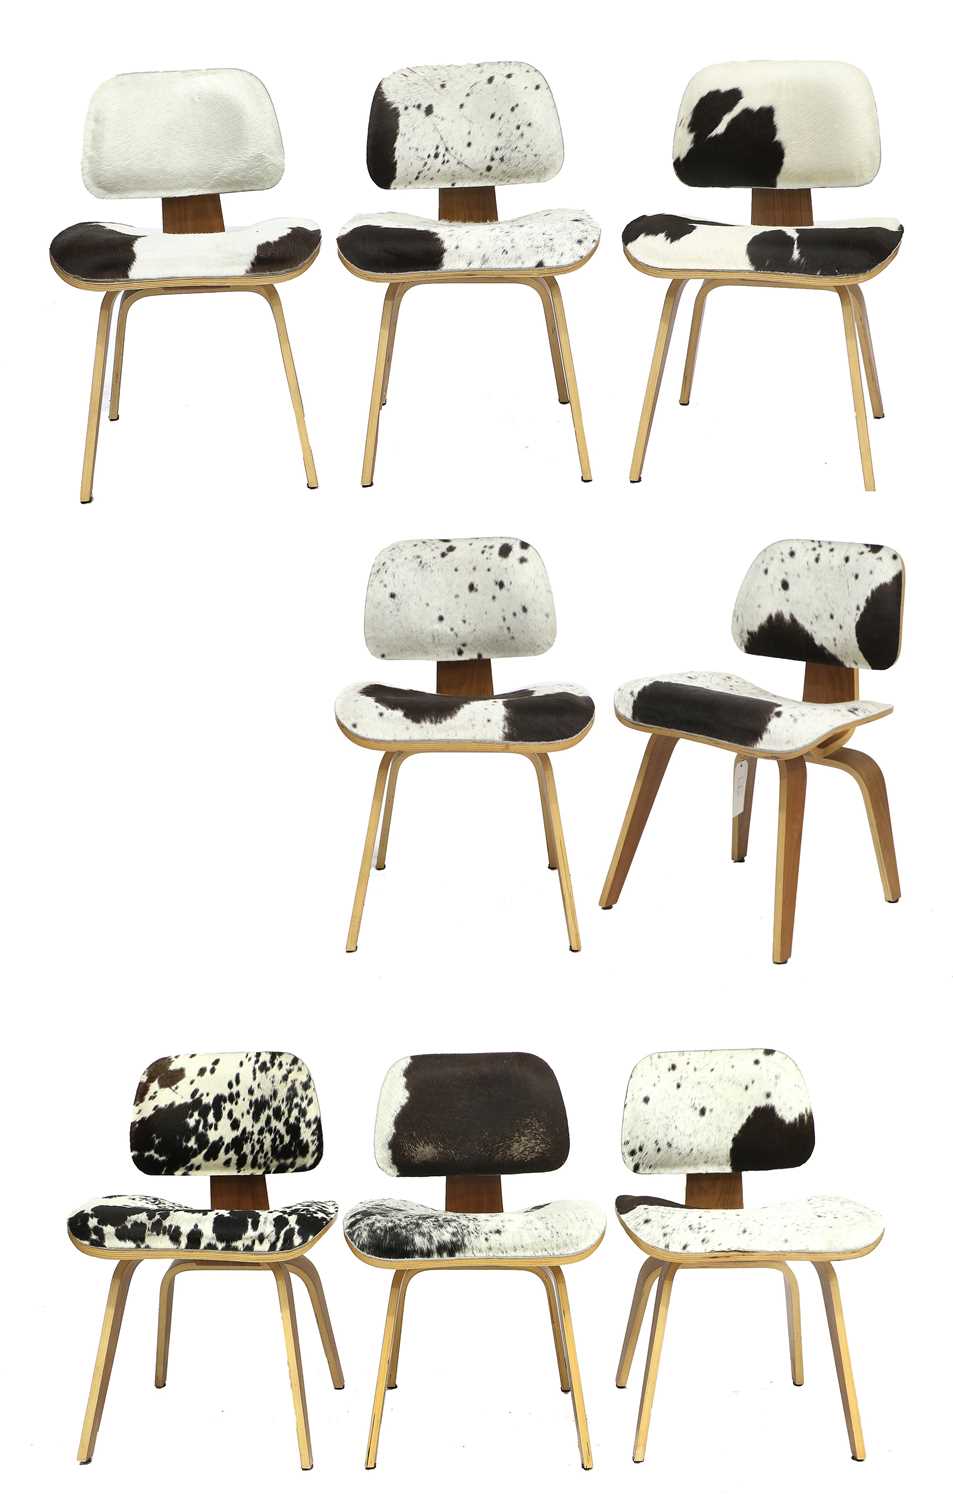 A Set of Eight Eames DCW Style Lounge Chairs, walnut veneered plywood frame, cow hide upholstered